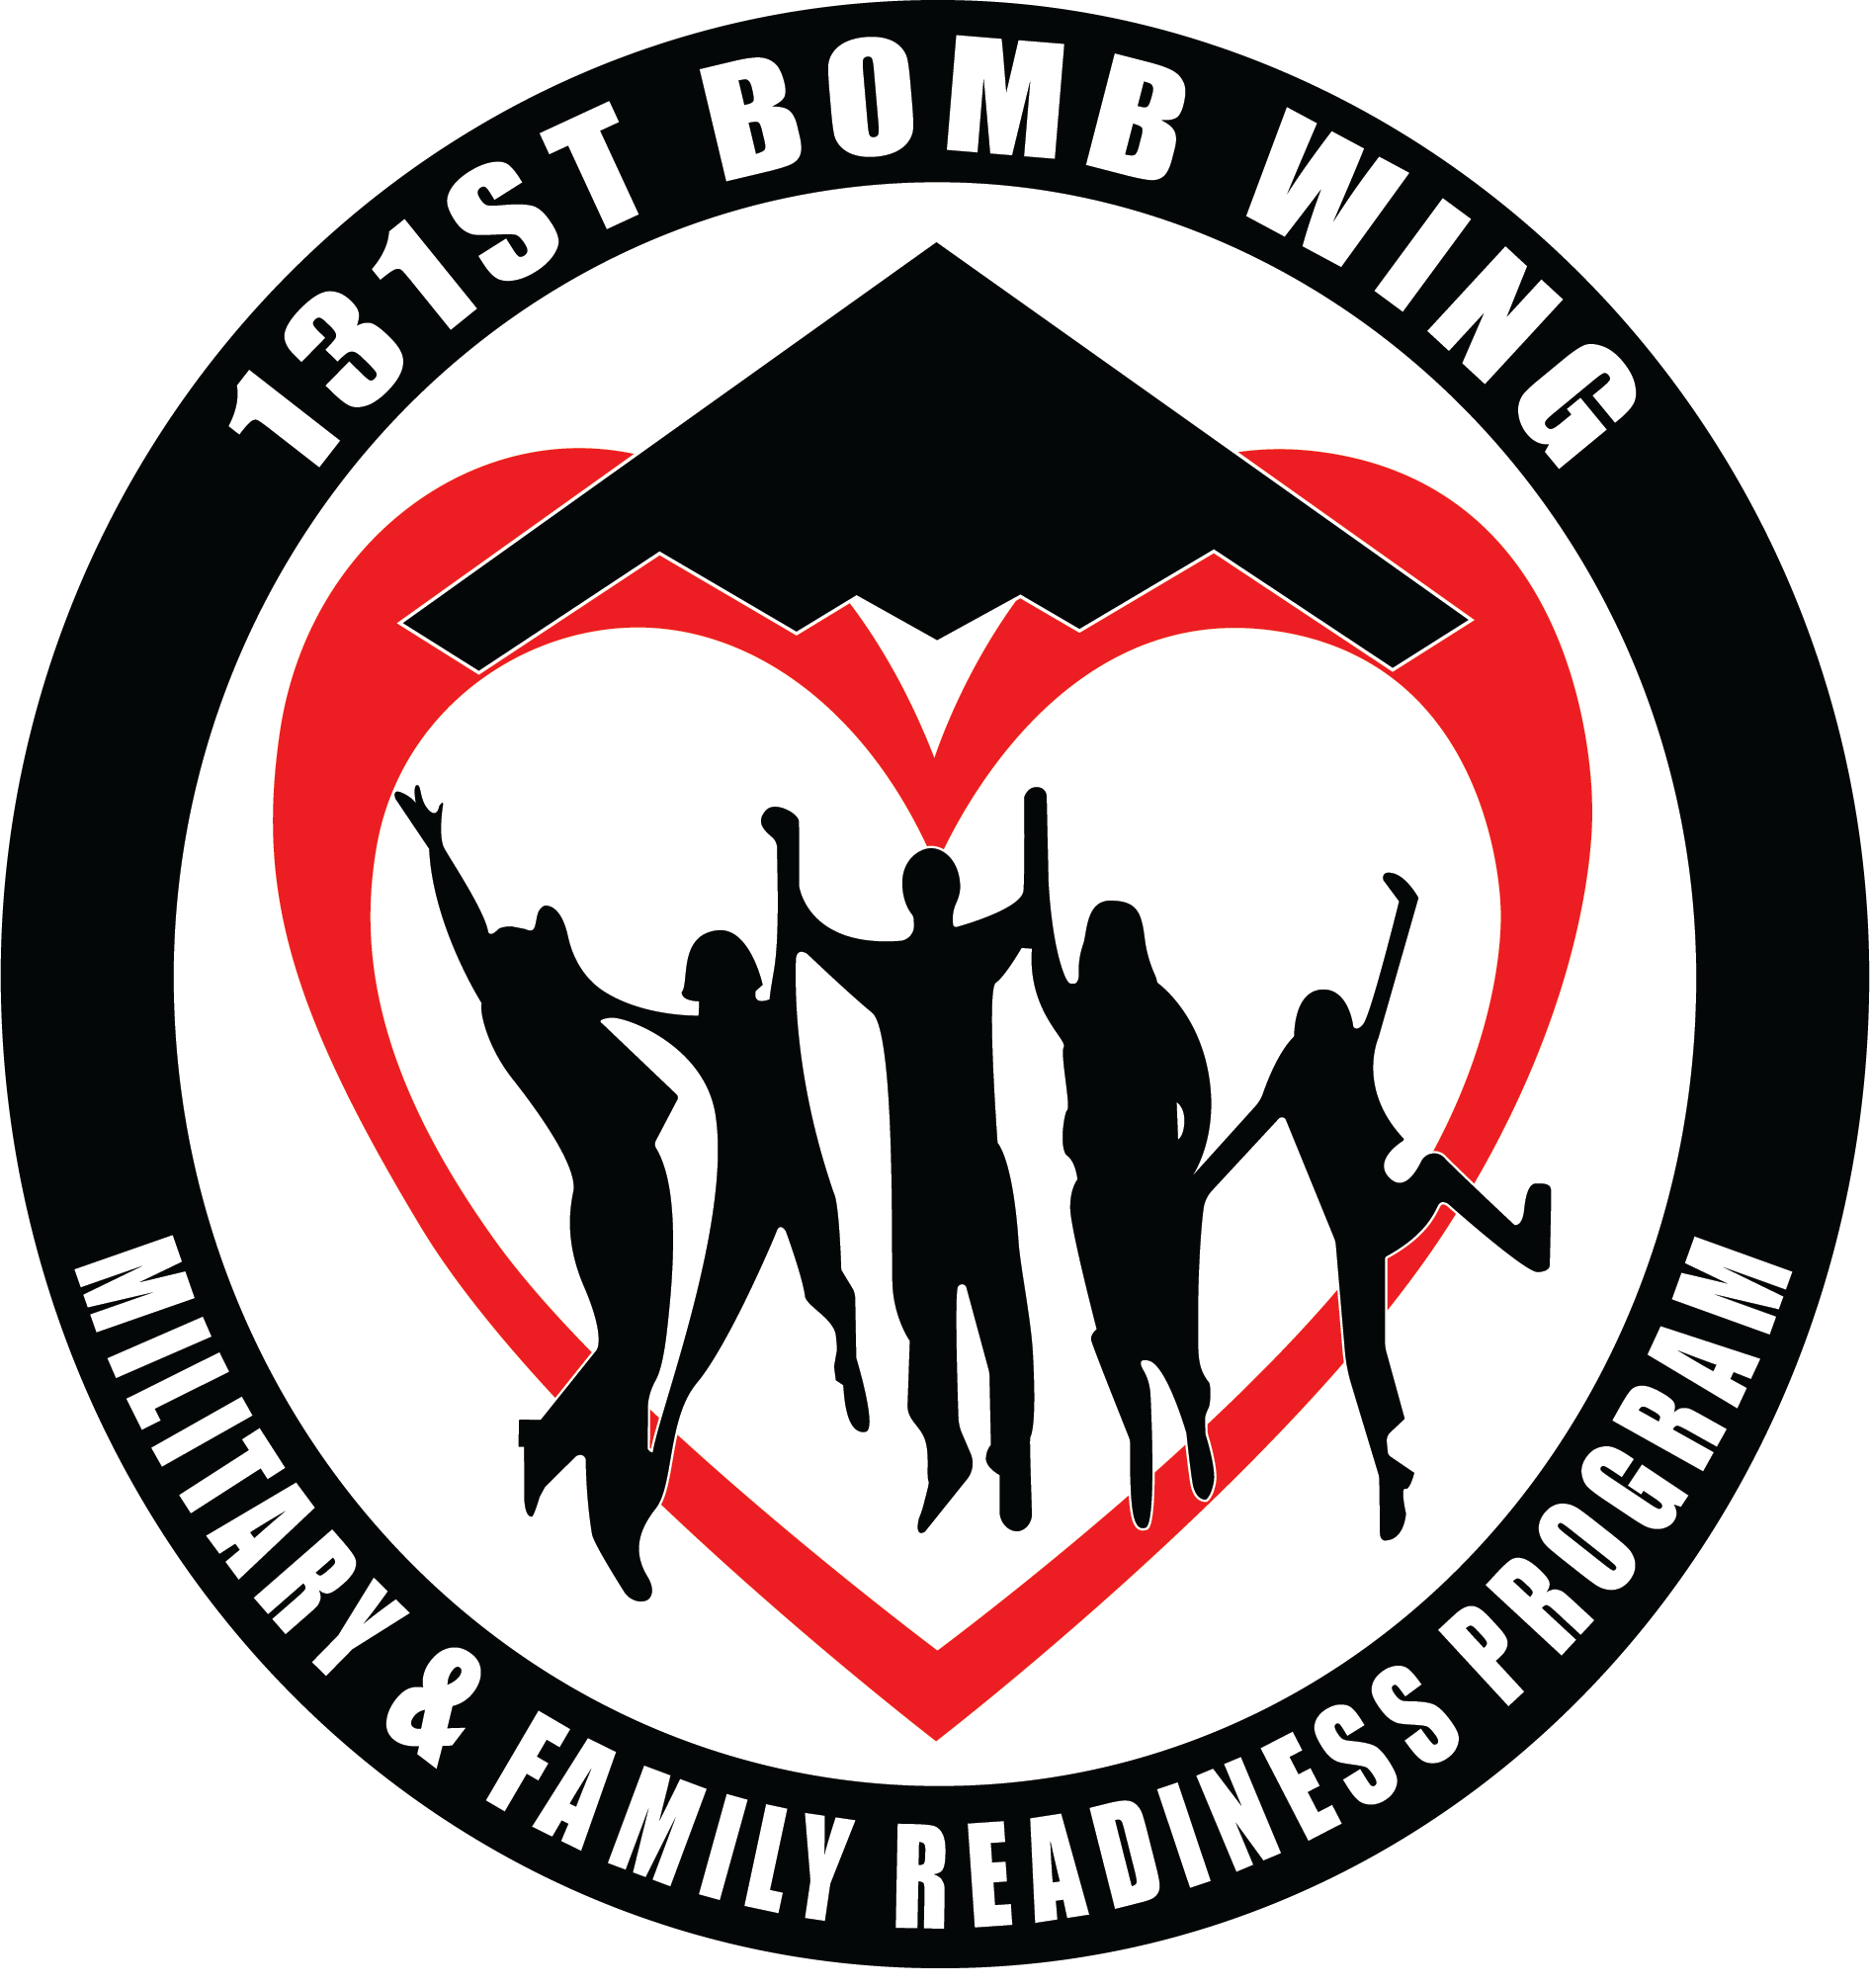 131st Bomb Wing Military and Family Readiness Program emblem